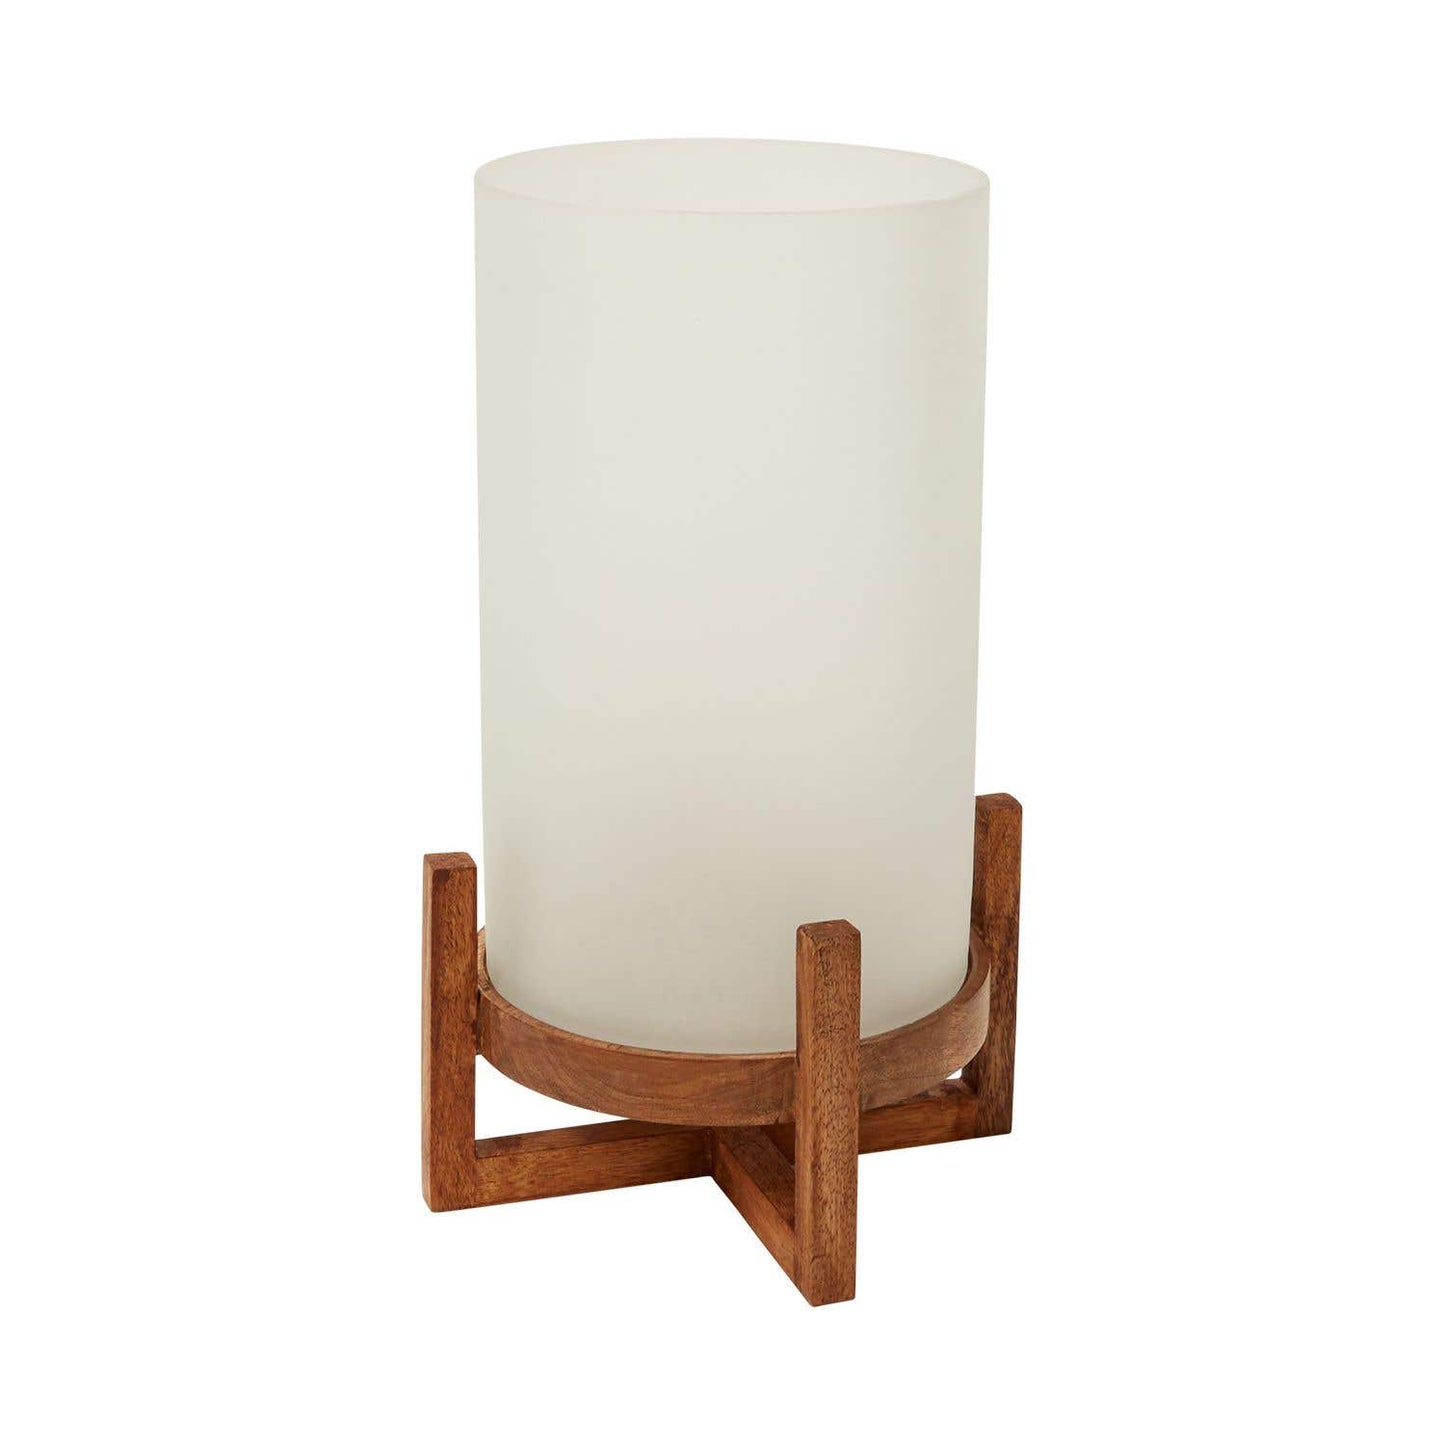 Frosted Glass and Wood Candle Holder - Large